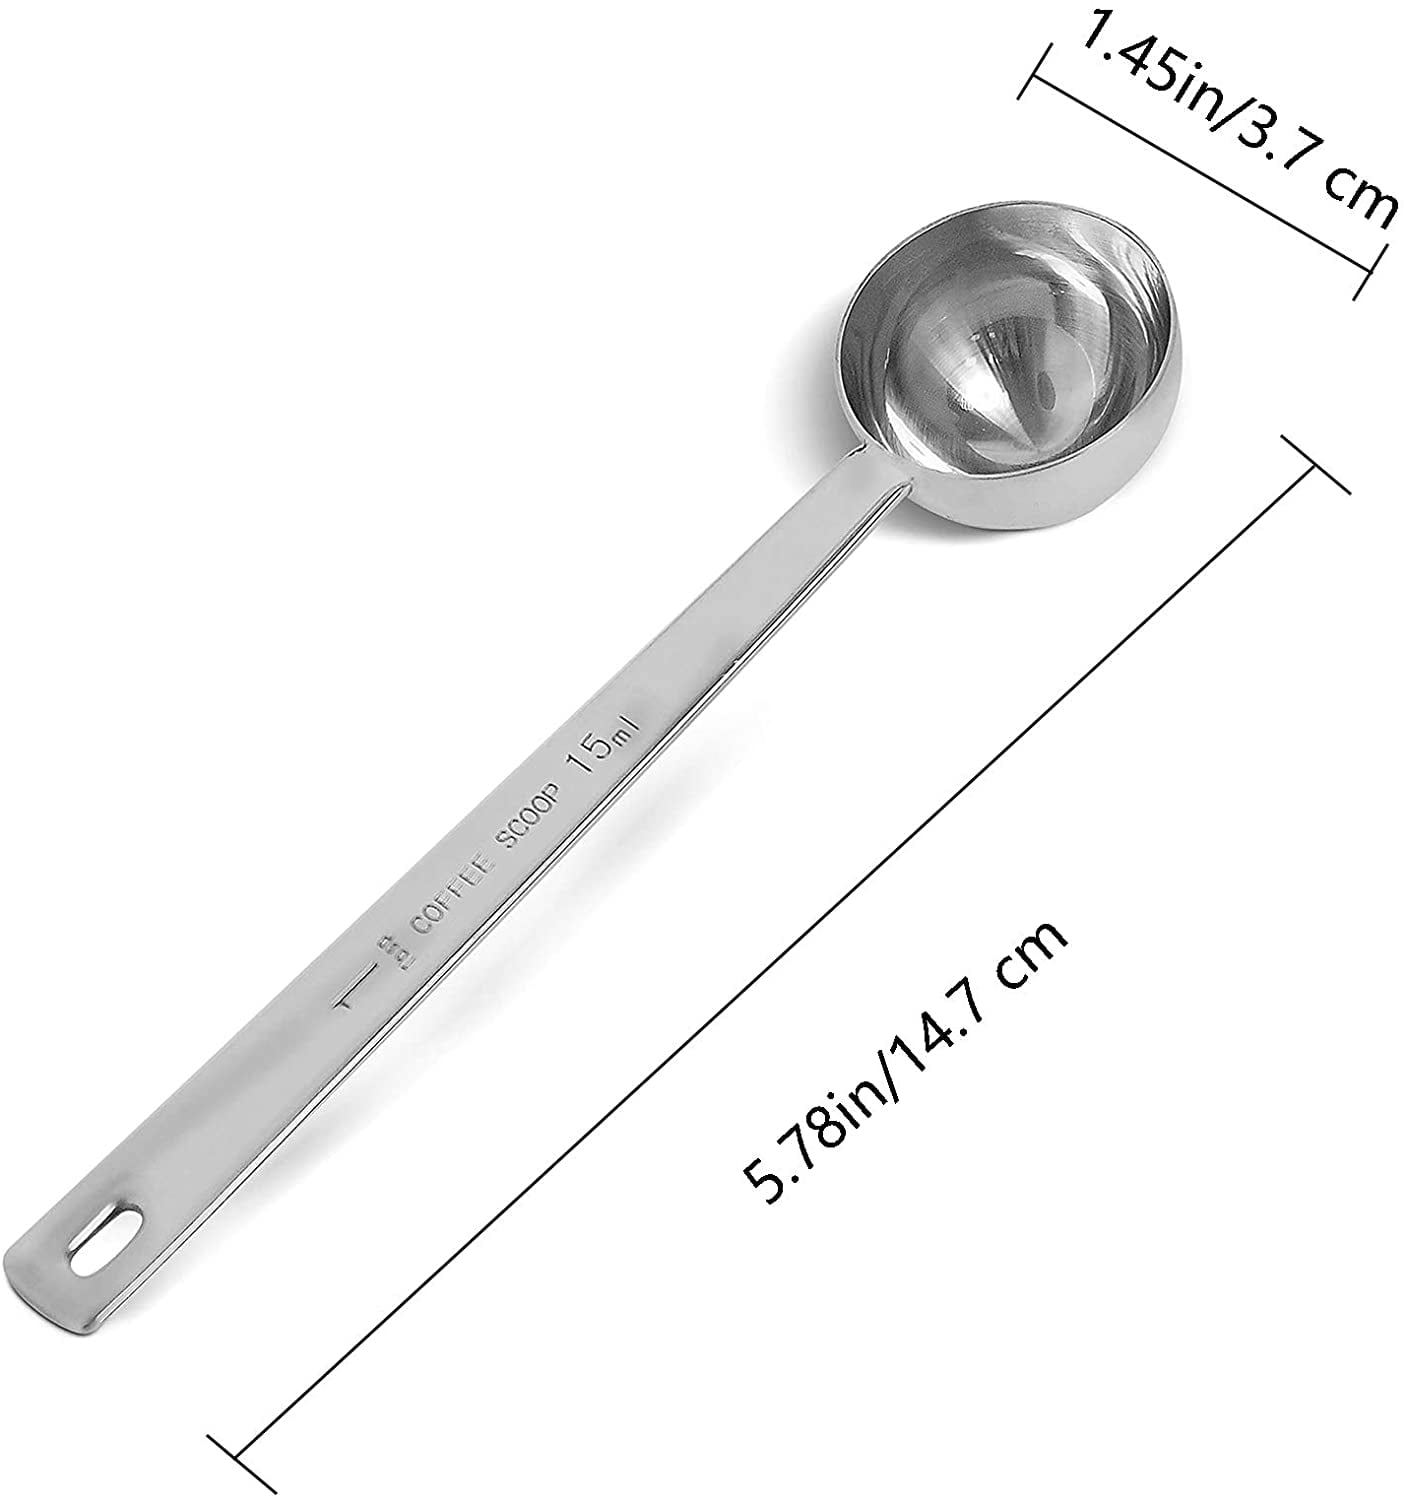 thinkstar , Endurance Stainless Steel Coffee Measuring Scoop Spoons 1  Tablespoon And 1 Teaspoon Long Handle With Tick Mark For Tea Sugar